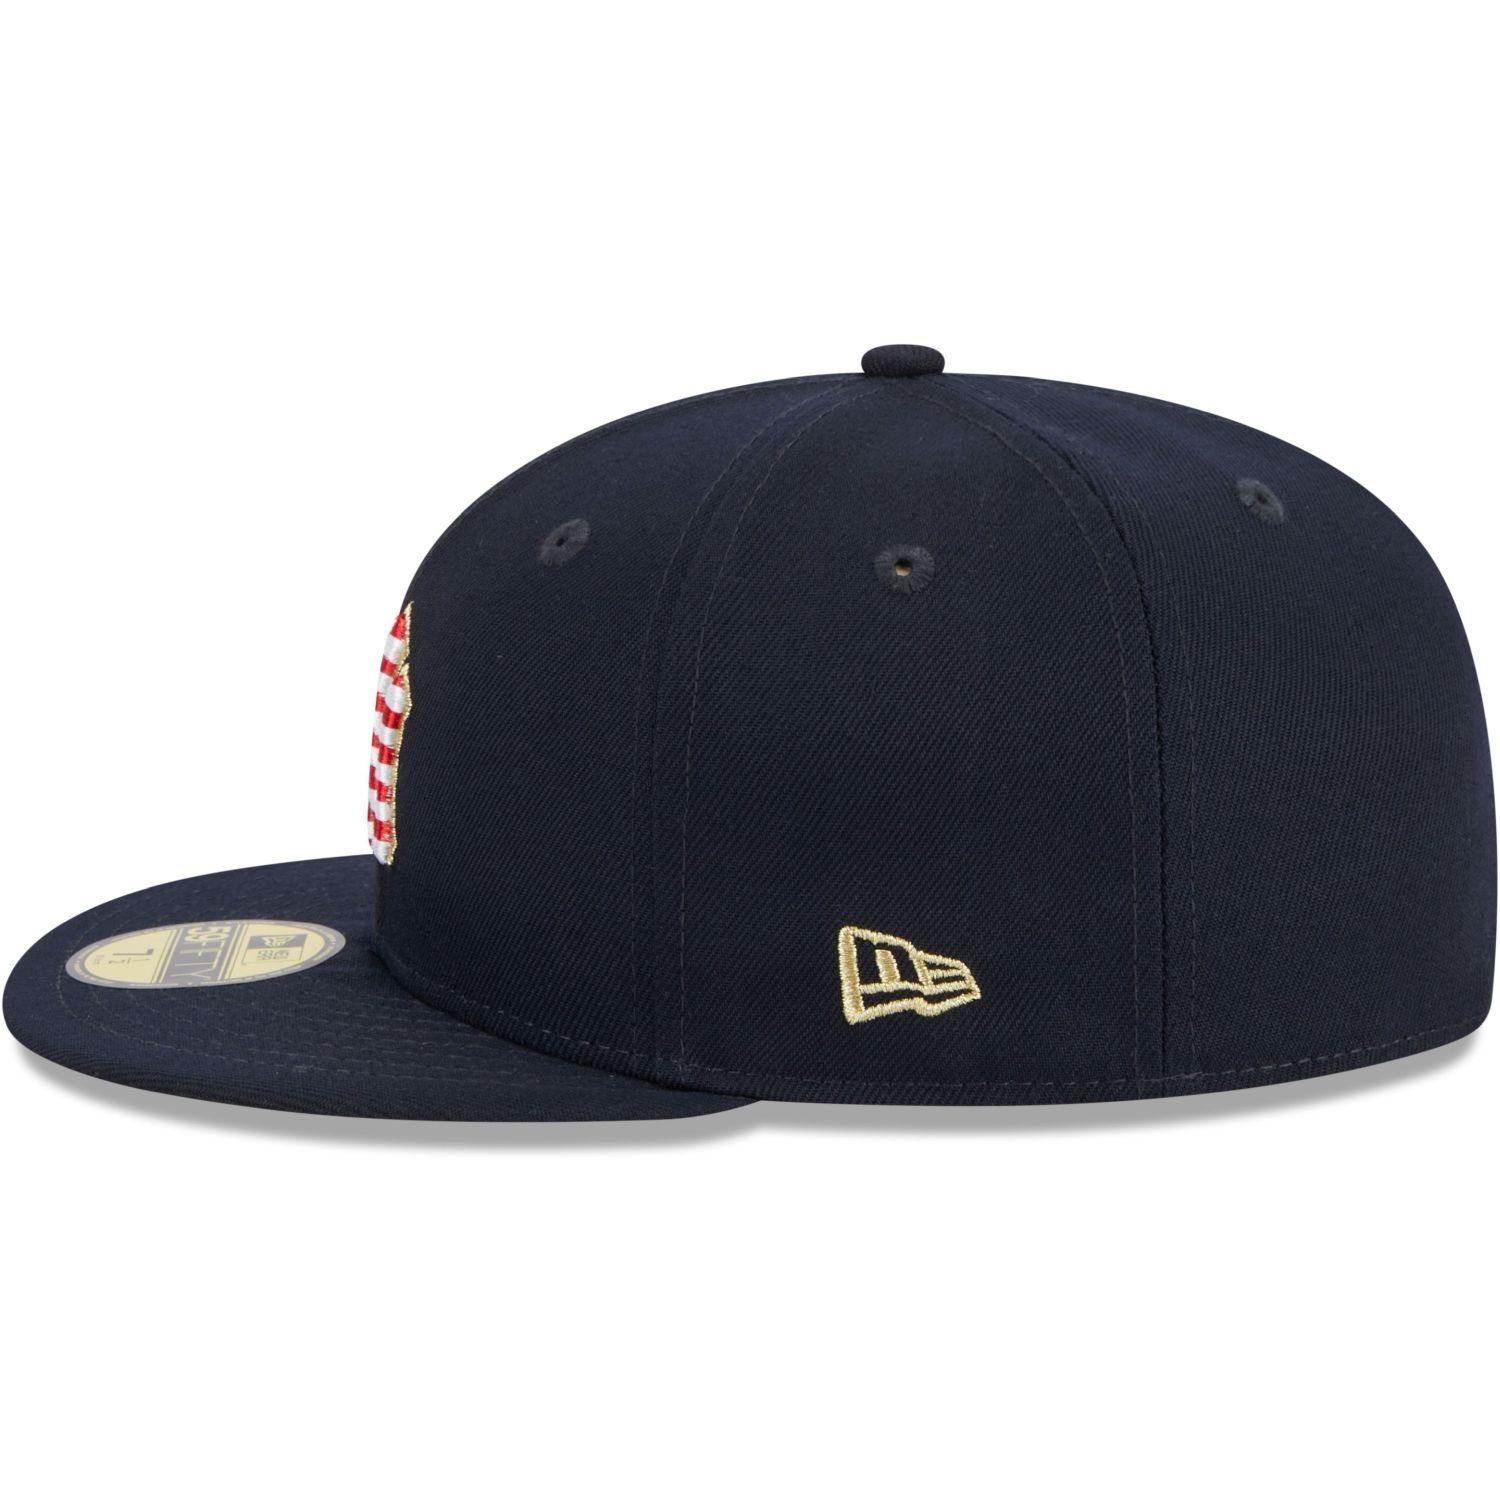 4TH Era New York JULY New Fitted Cap 59Fifty Yankees